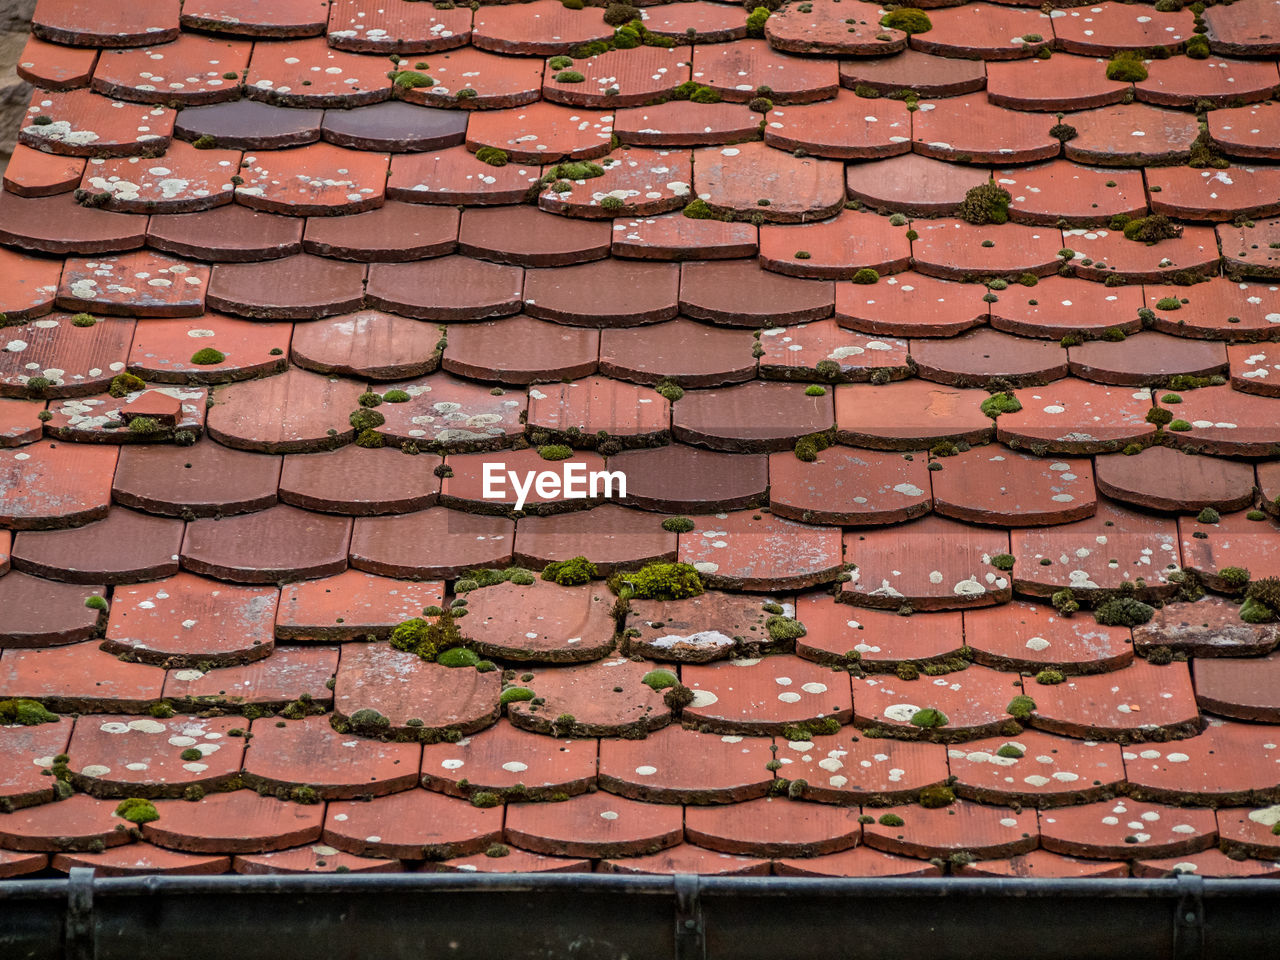 HIGH ANGLE VIEW OF BRICK WALL WITH COBBLESTONE